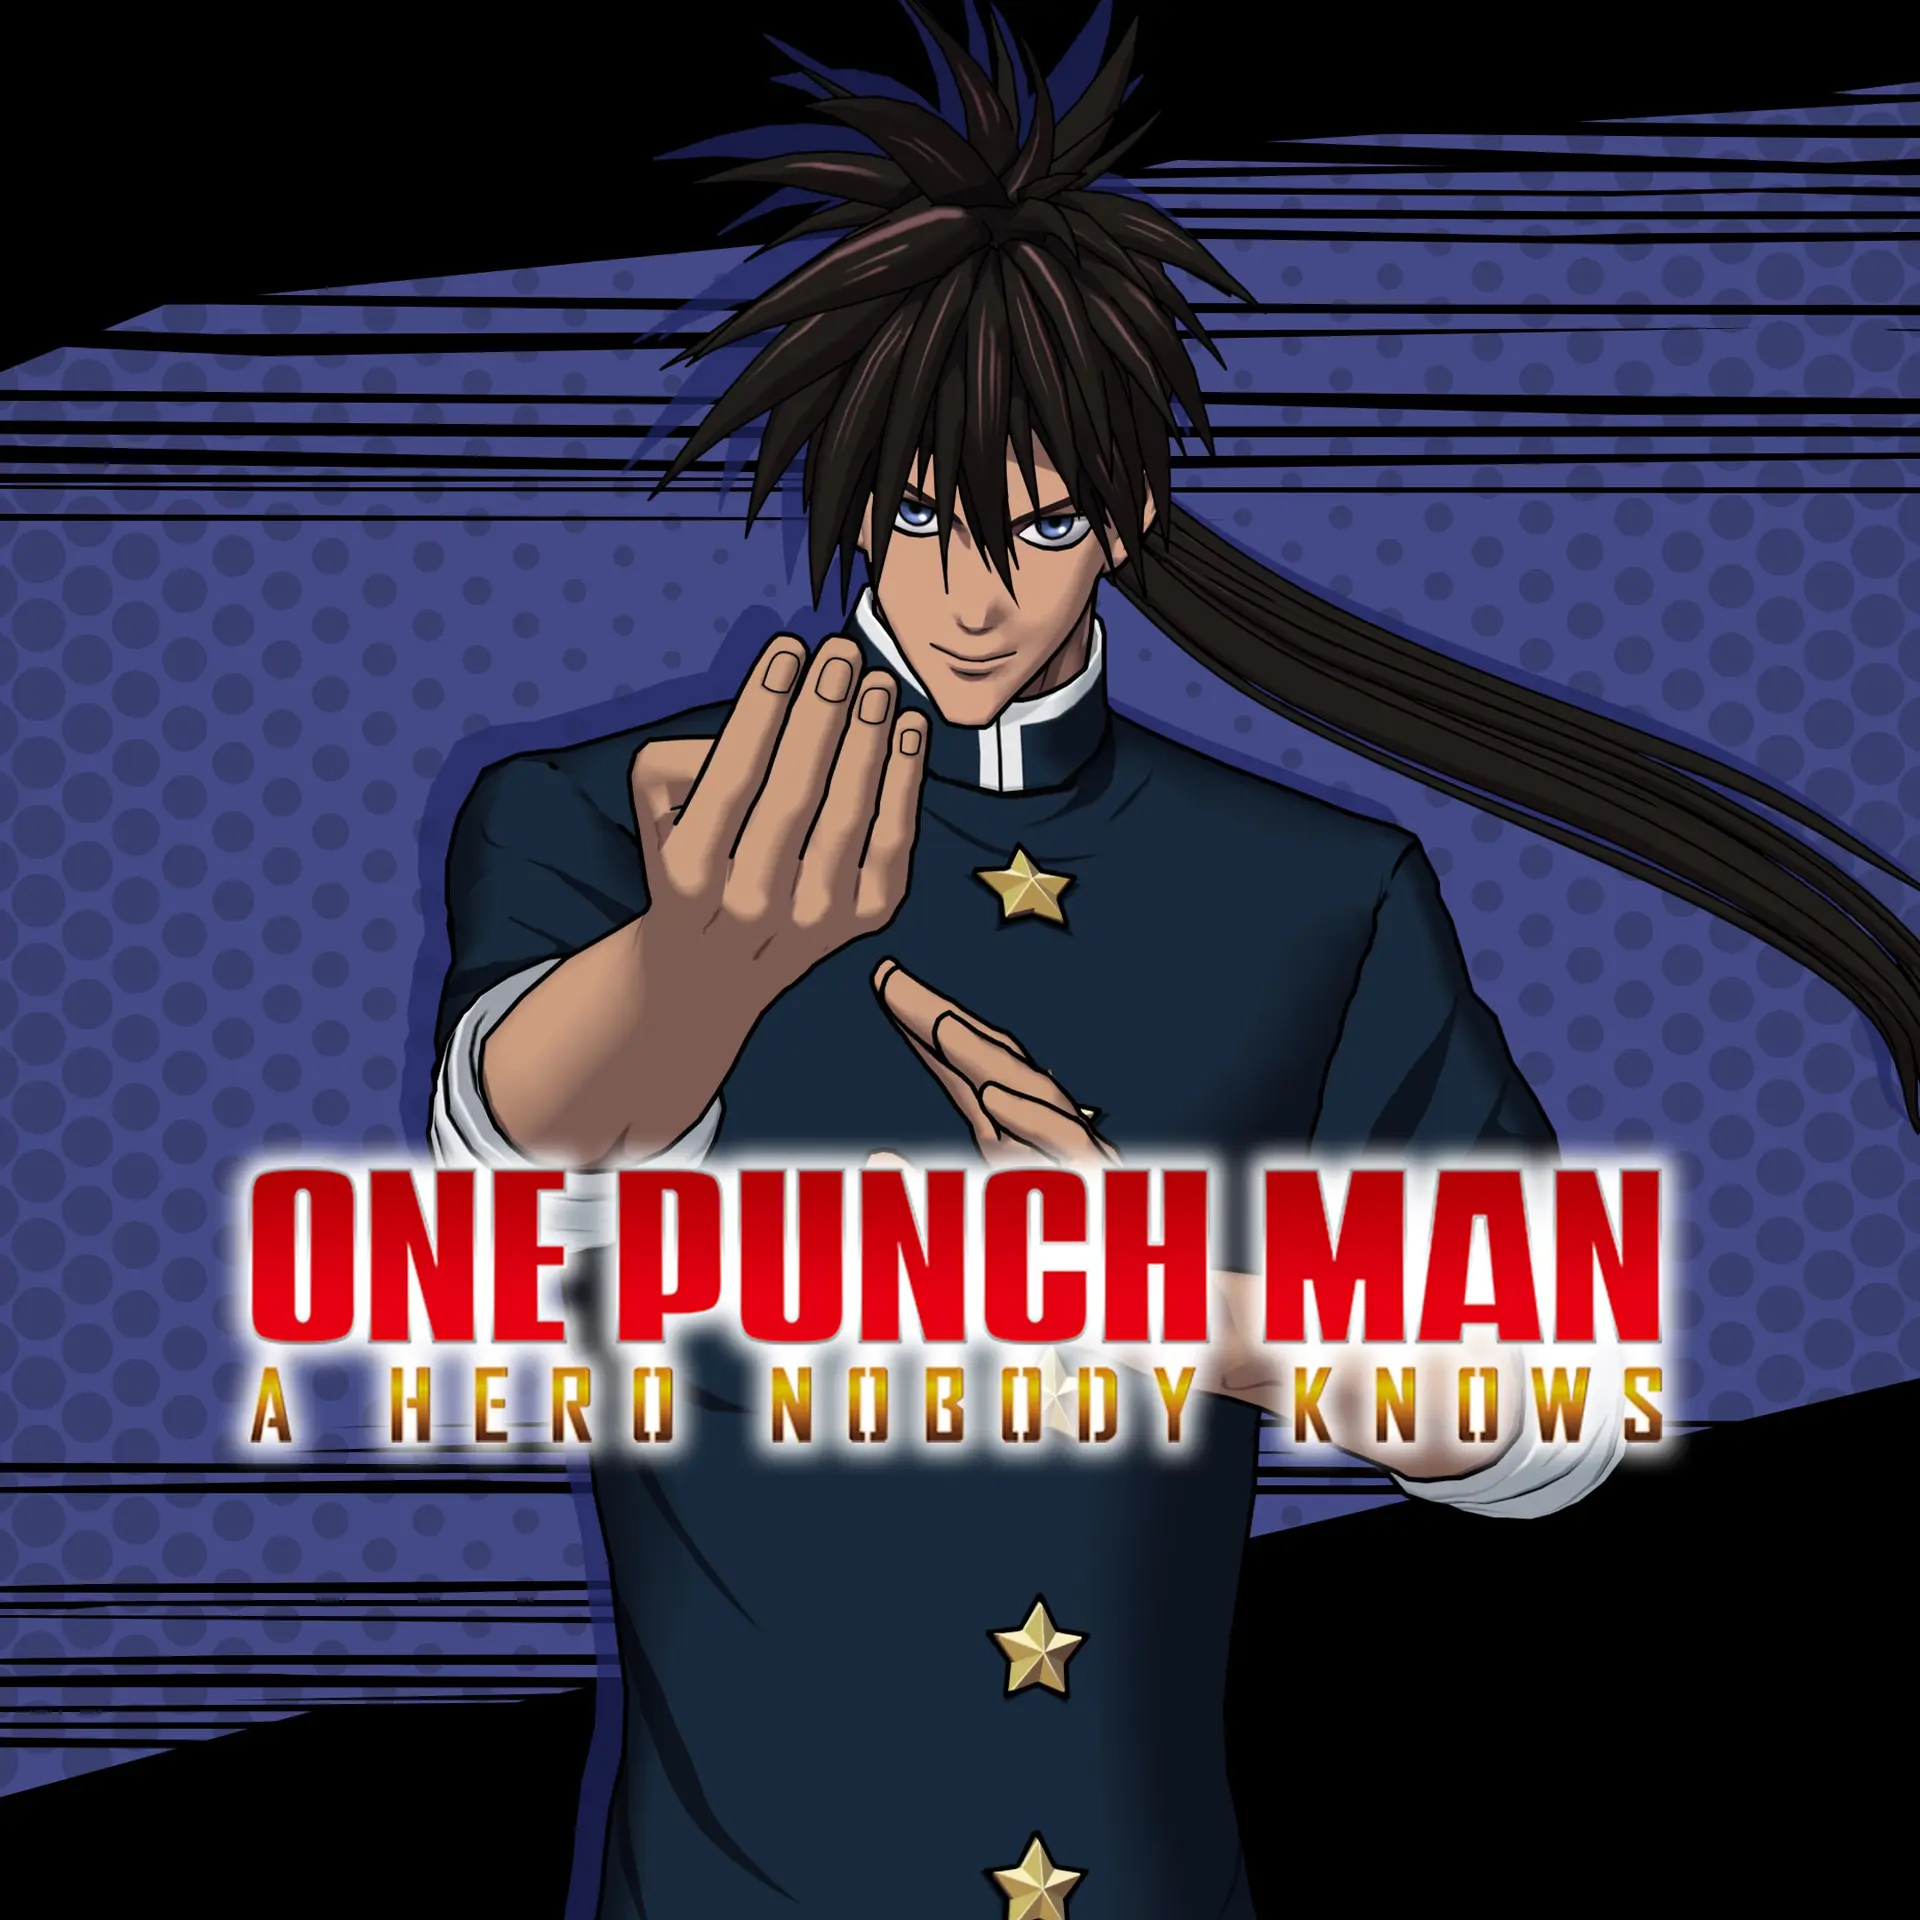 ONE PUNCH MAN: A HERO NOBODY KNOWS DLC Pack 1: Suiryu (Xbox Games UK)